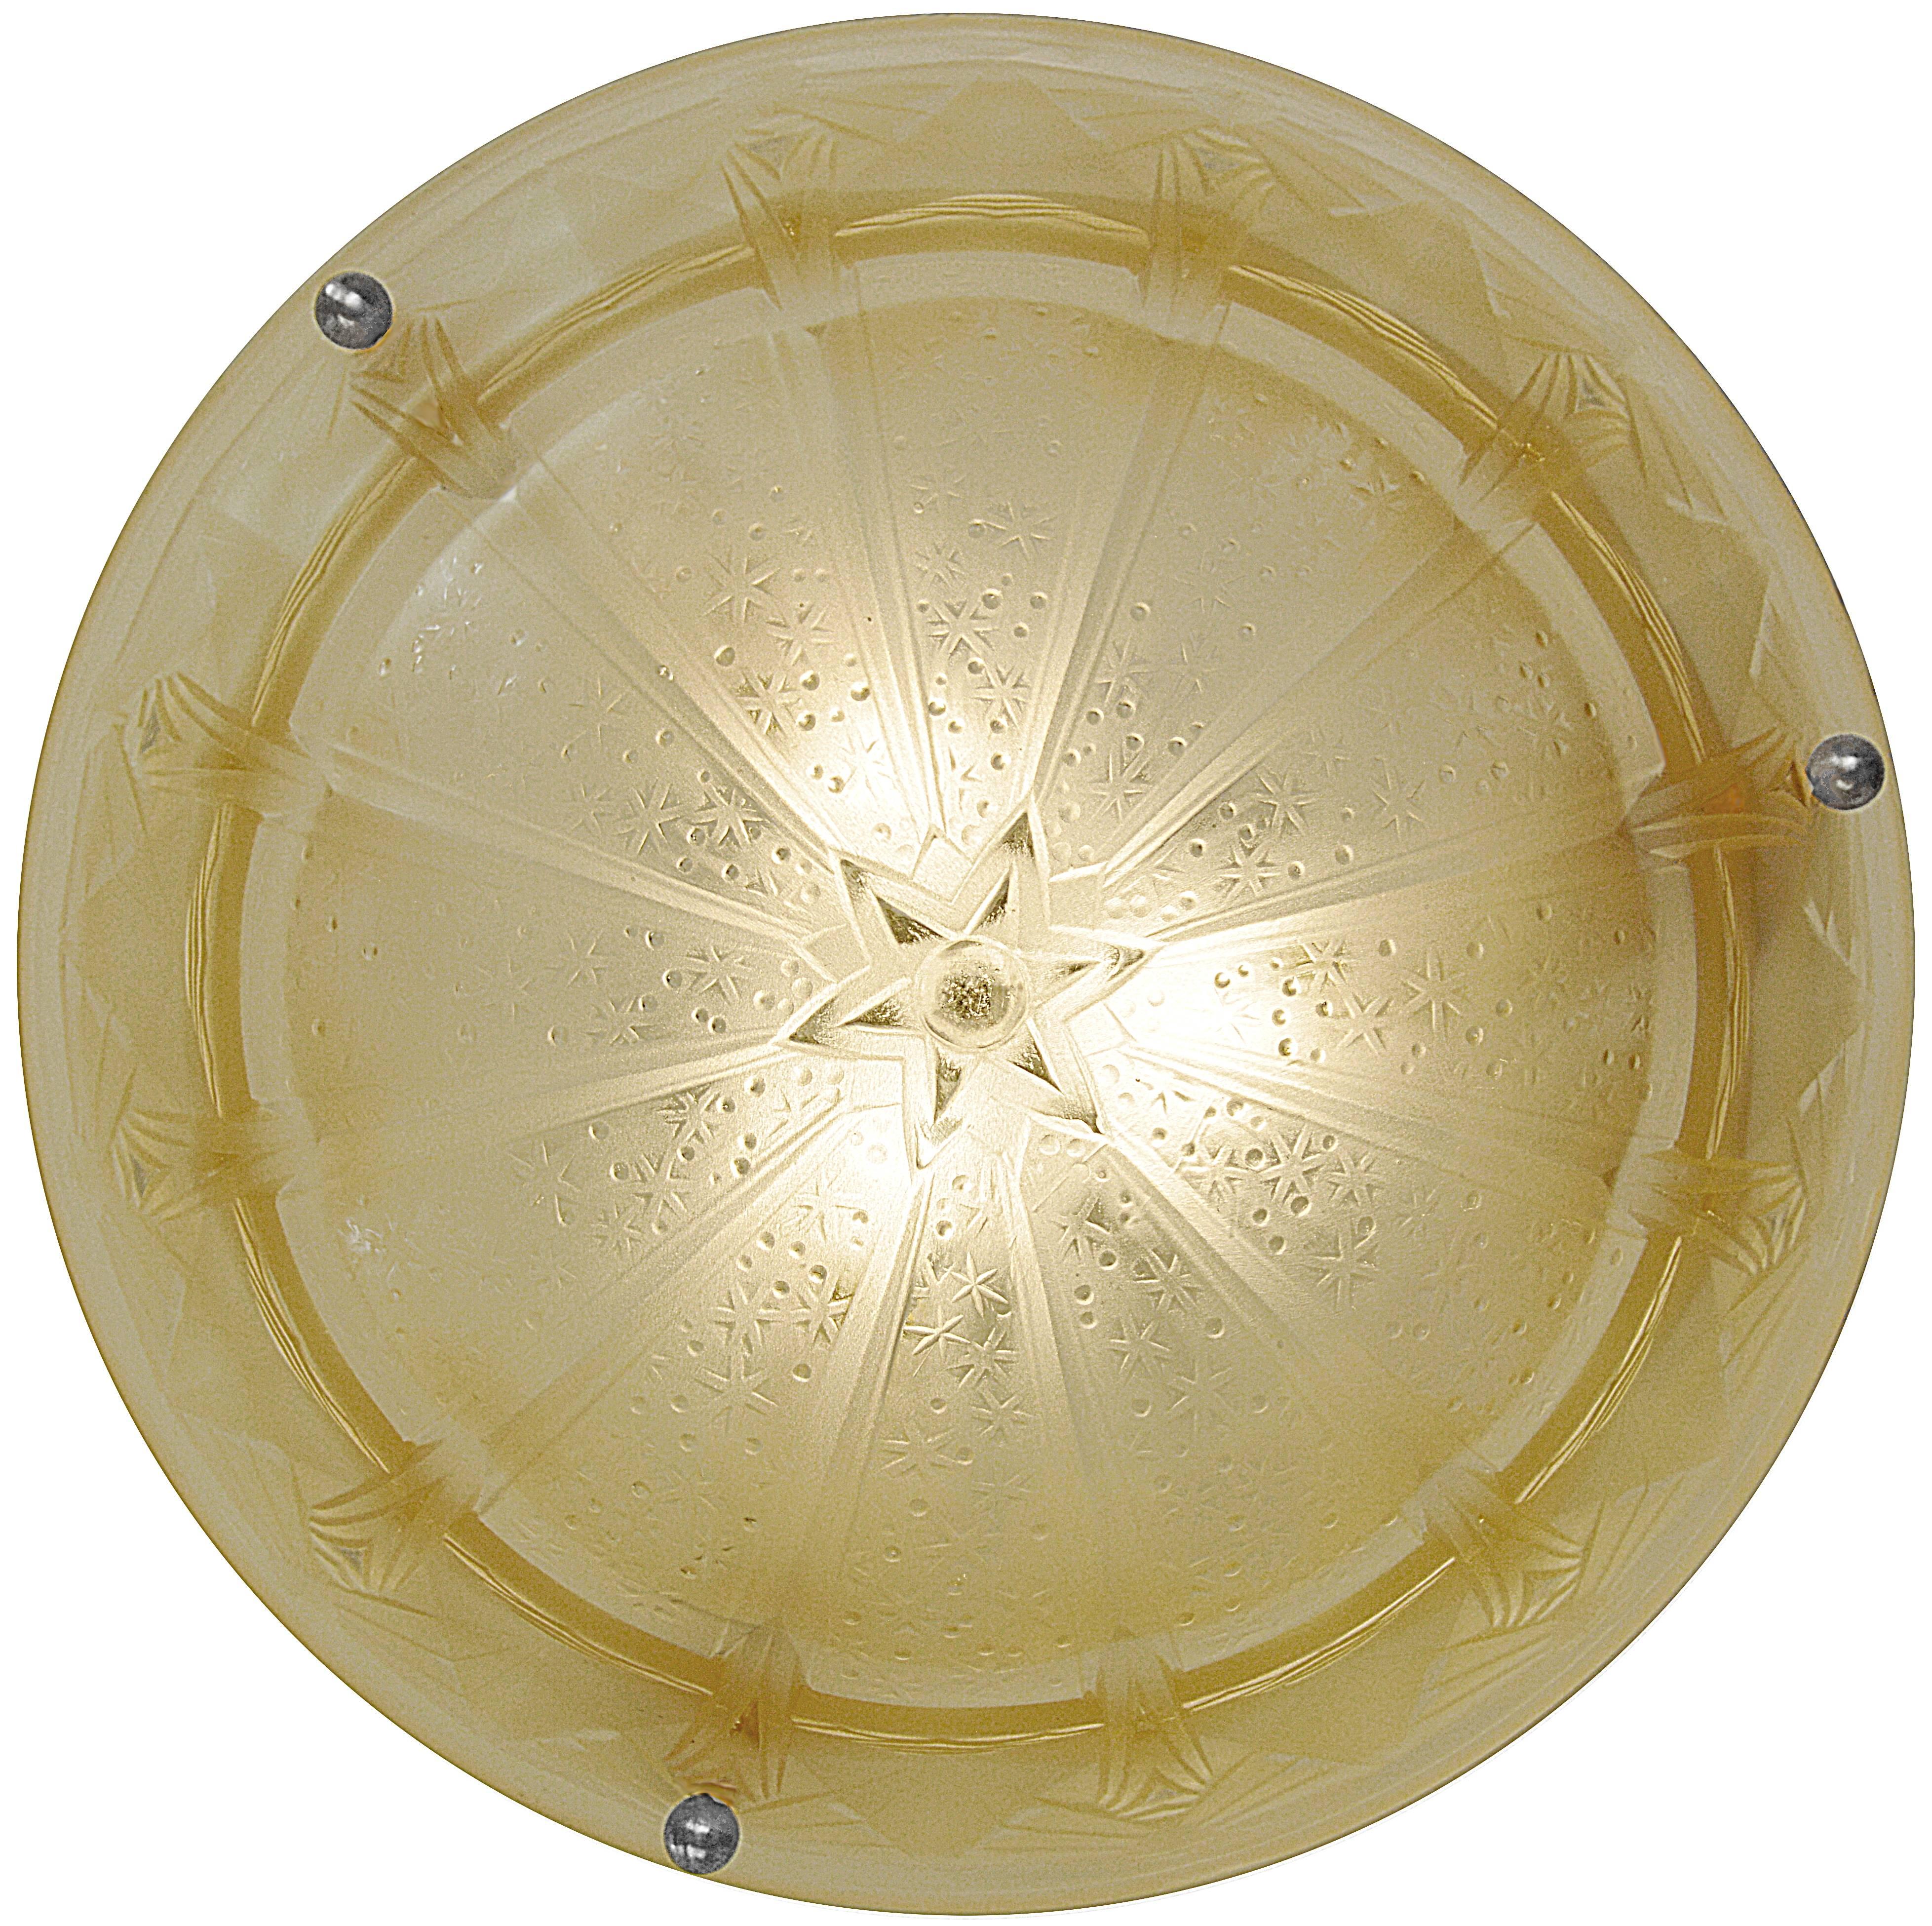 French Art Deco chandelier by Muller Freres, Luneville, France, circa 1925. Thick frosted molded glass shade hung at its original nickel-plated fixture. High quality lampshade with sharp edges. Its color is sometimes slightly apricot, sometimes